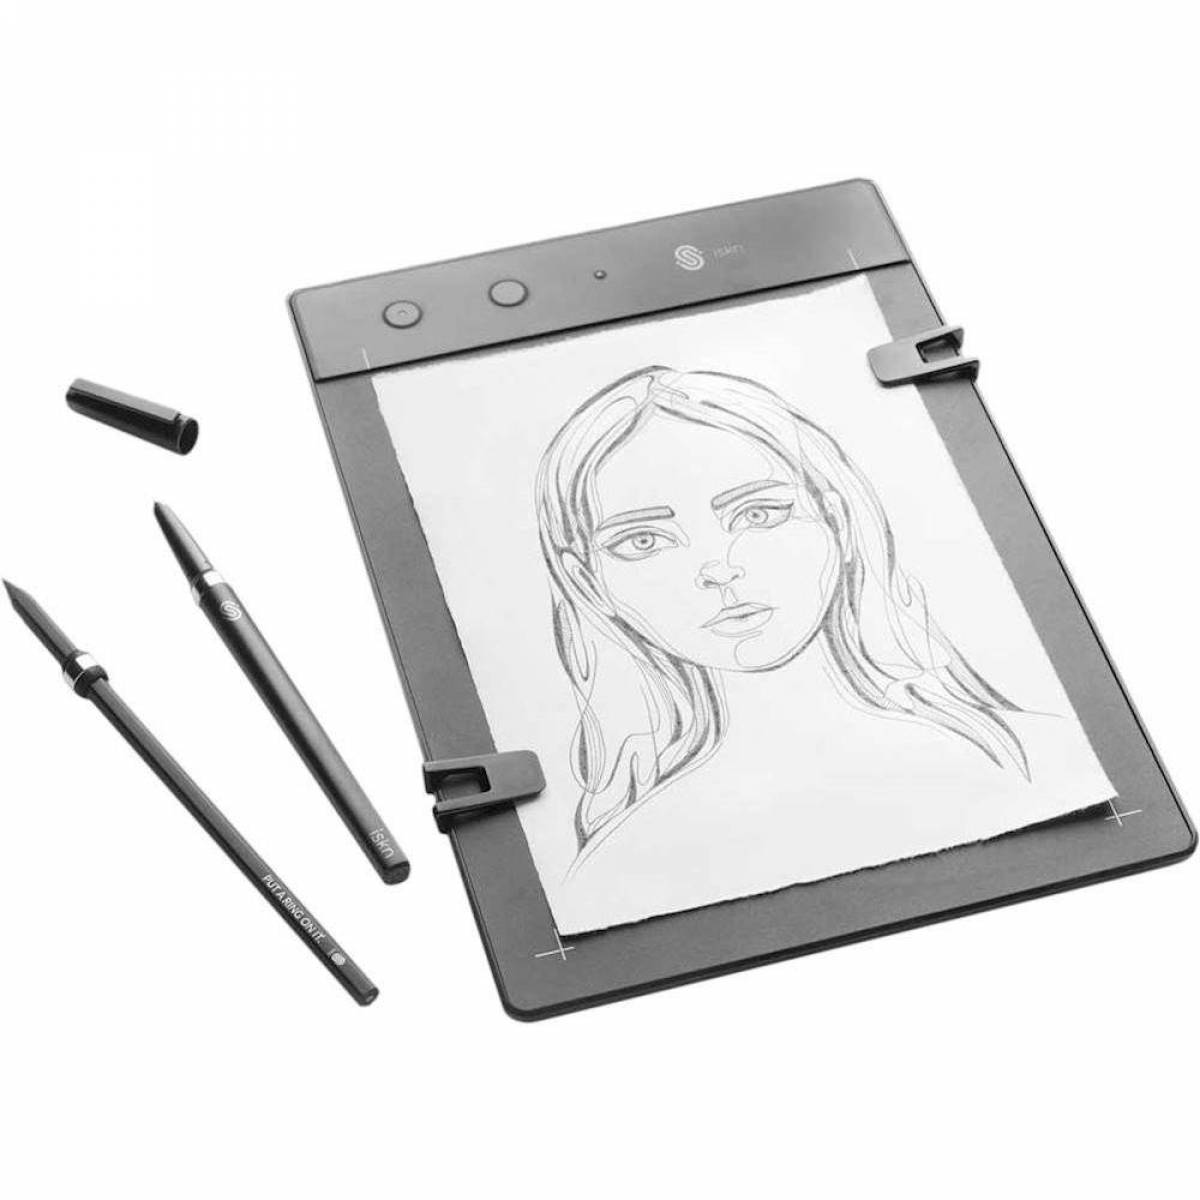 Awesome ipad coloring book with stylus